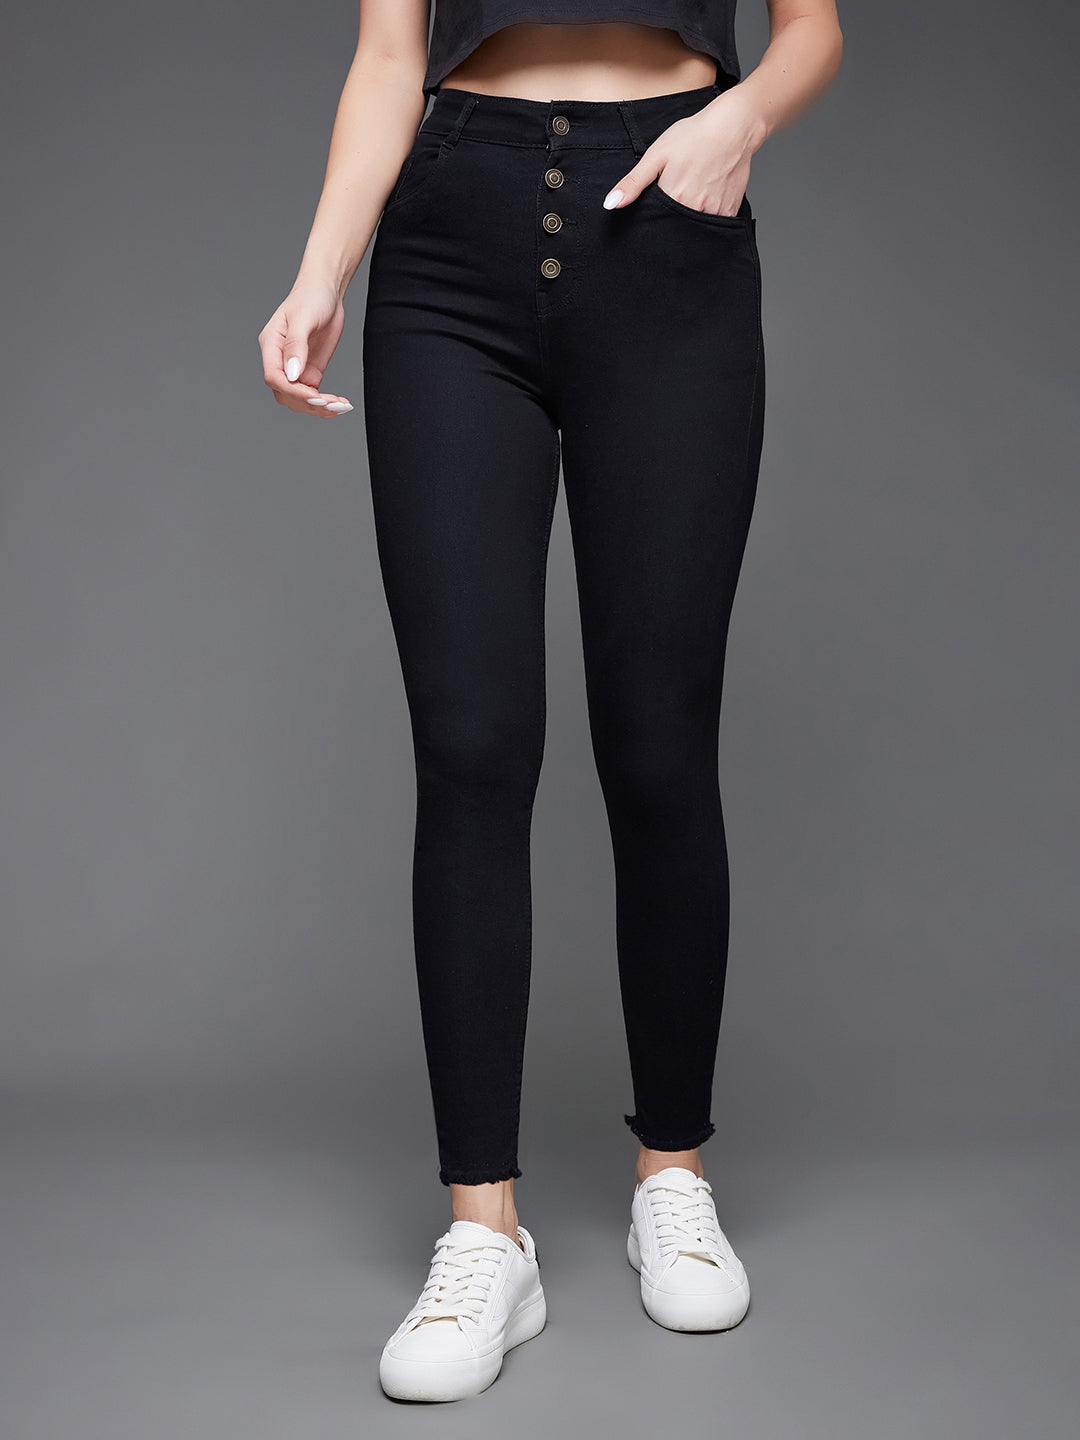 MISS CHASE | Black Skinny High Rise Clean Look Cropped Fringed Hemline Solid Stretchable Denim Jeans